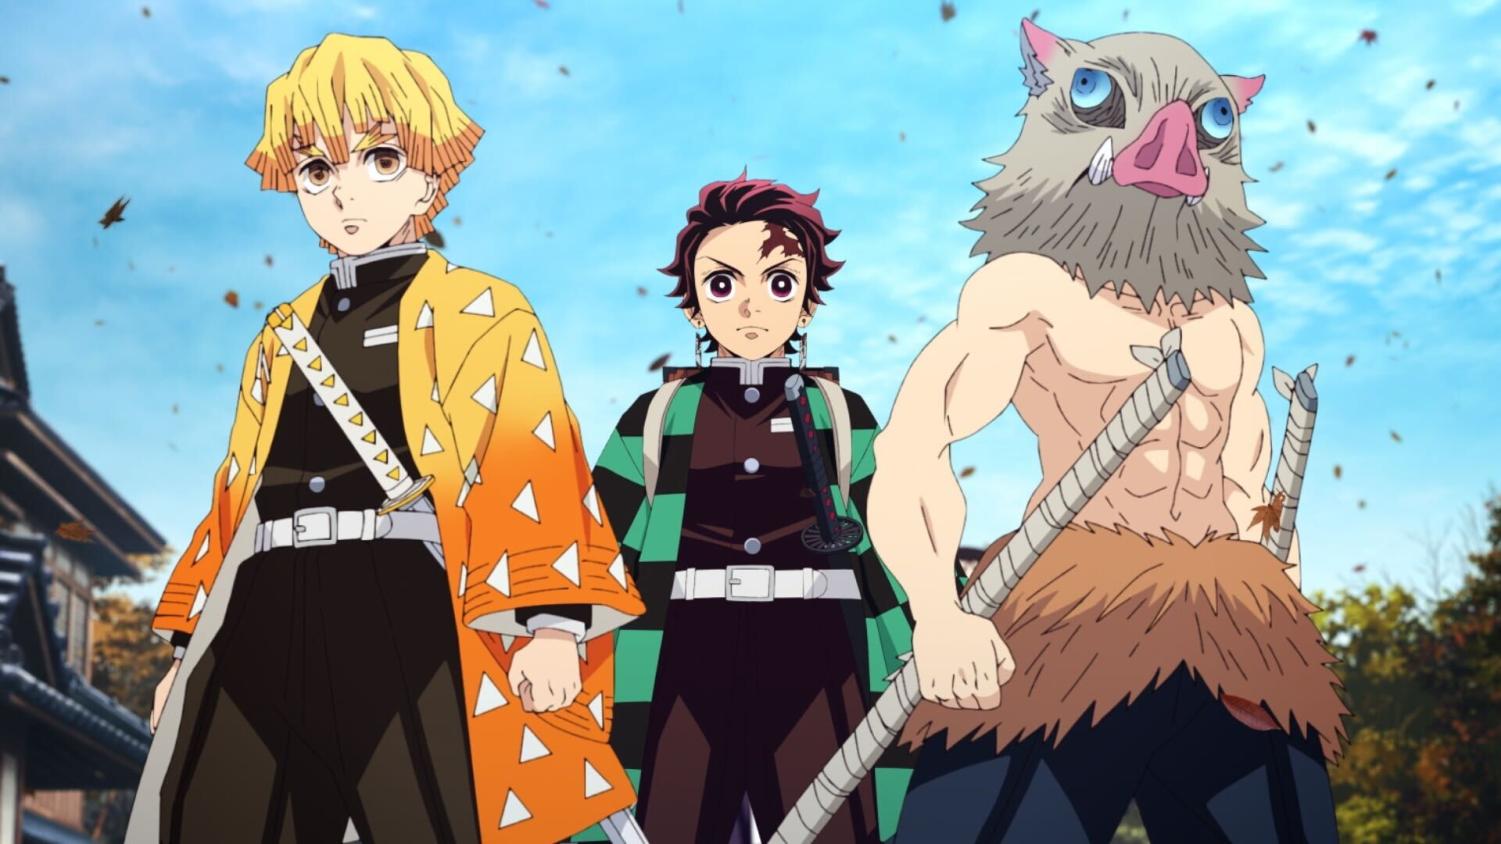 Demon Slayer Season 3 Episode 11 Review - But Why Tho?